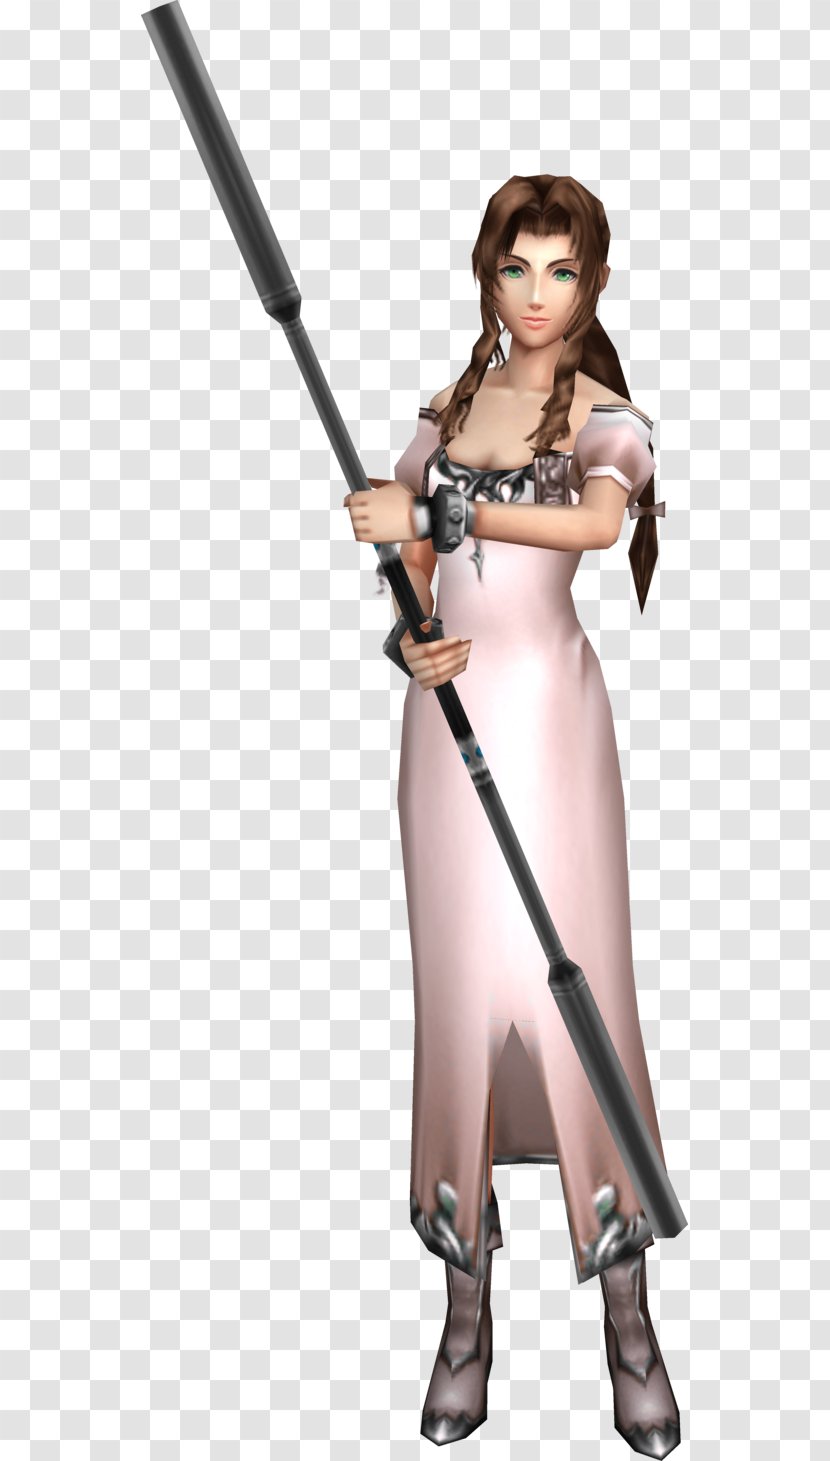 The Woman Warrior Weapon Spear Fiction Character - Costume Transparent PNG